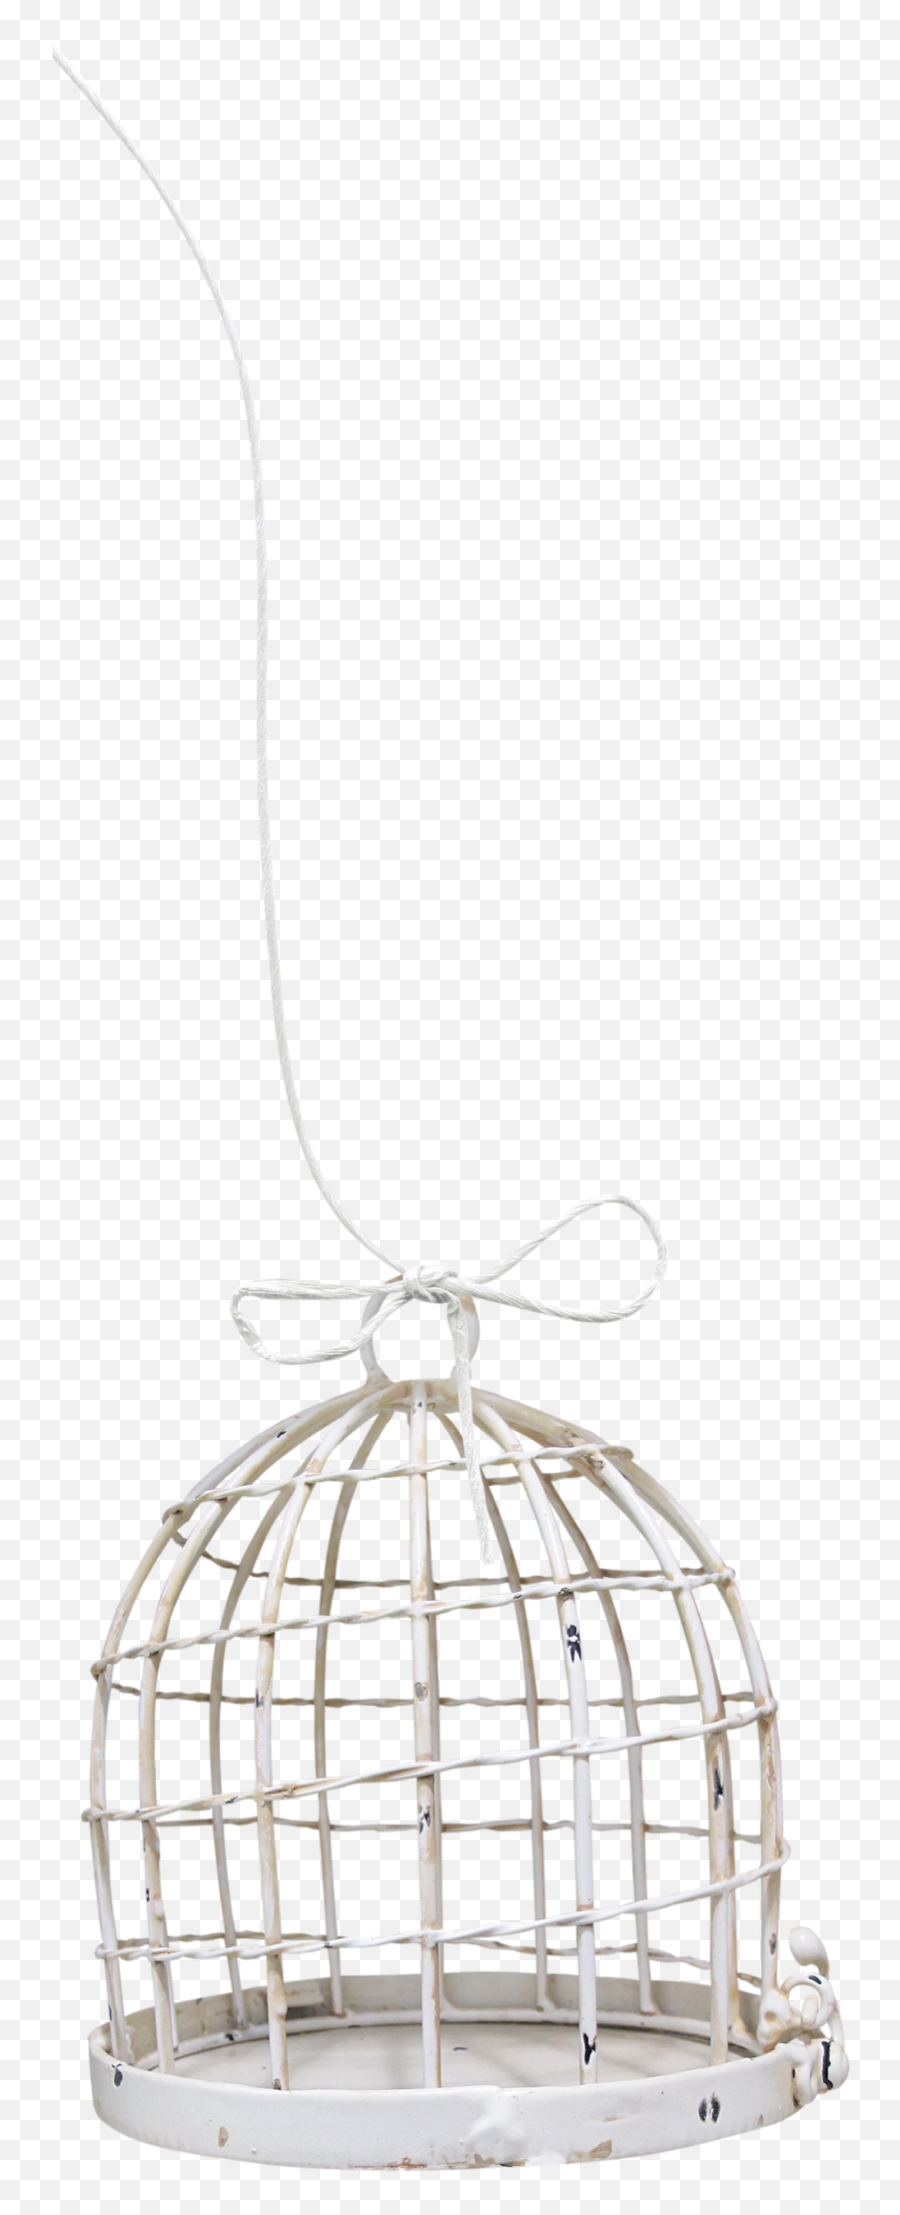 Bird Cage Png Image - Purepng Free Transparent Cc0 Png Solid,Birdcage Png